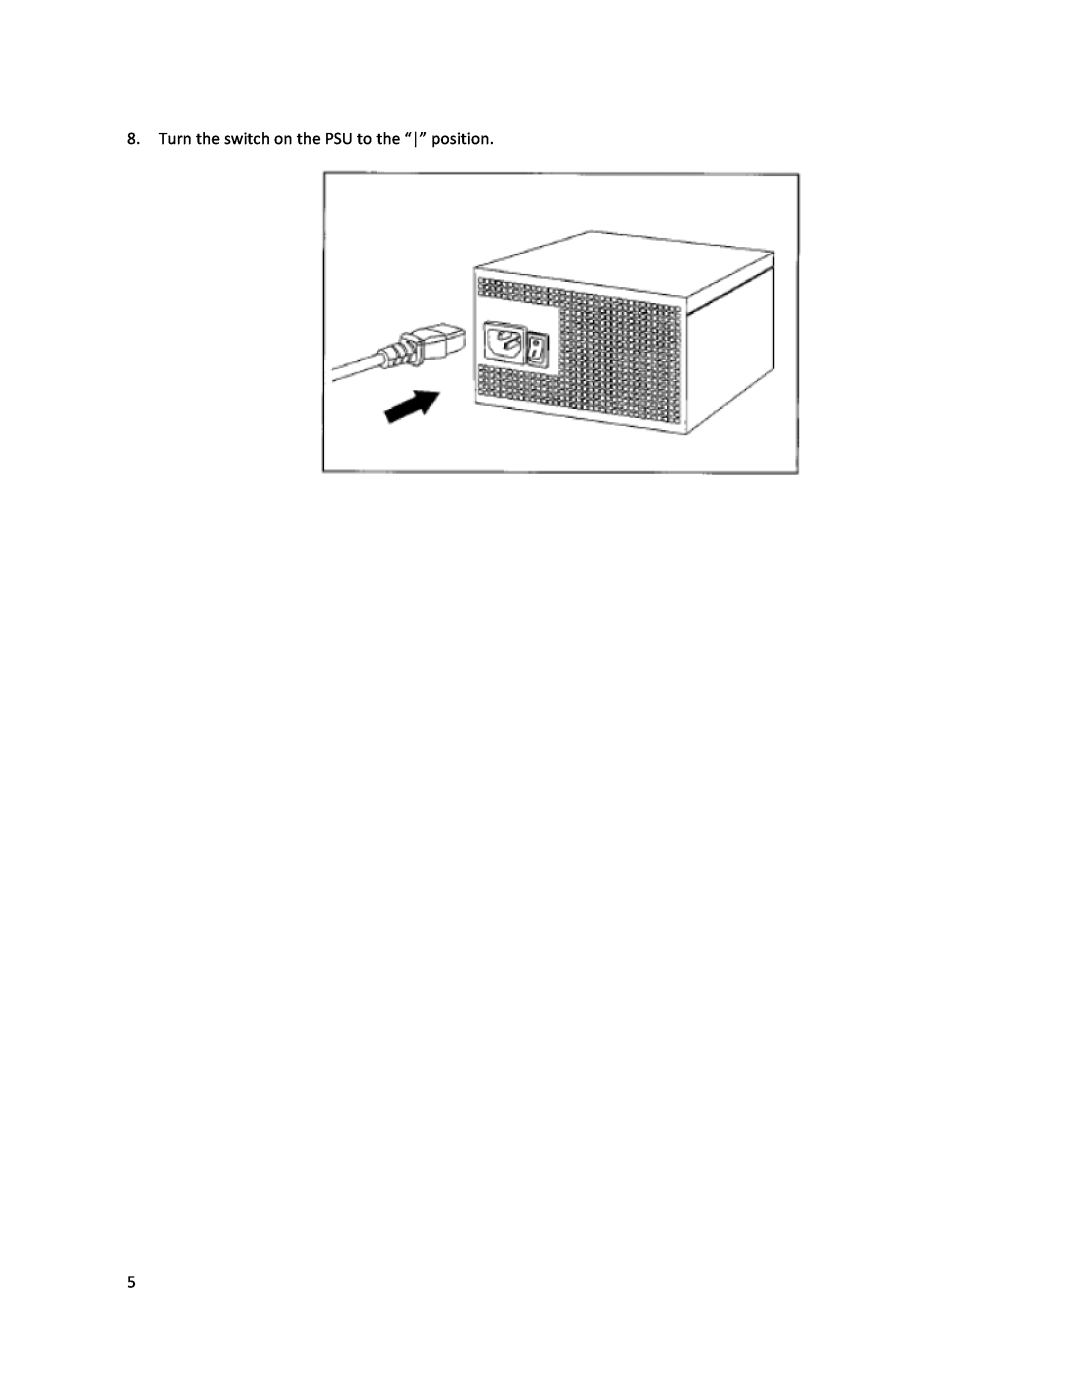 Antec HCG-620 user manual Turn the switch on the PSU to the “” position 